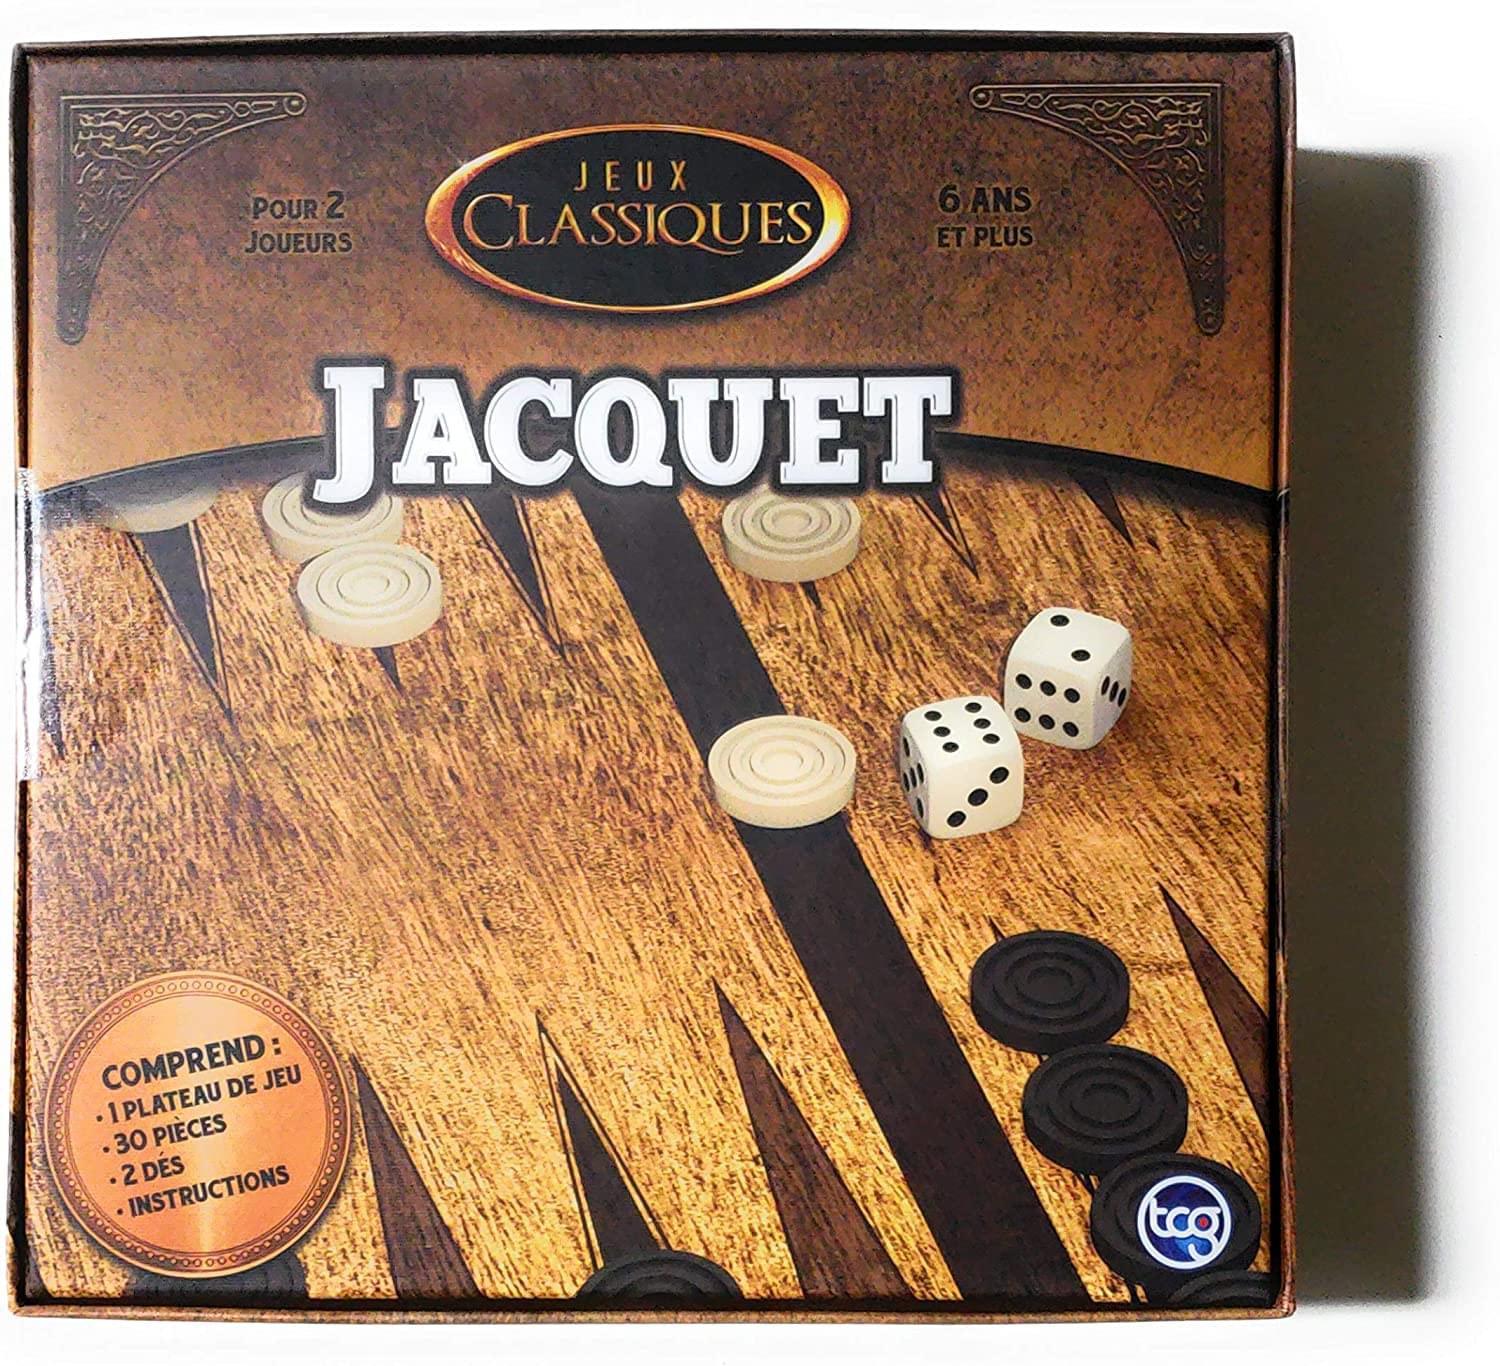 Classic Games Wood Backgammon Set | Board & 30 Game Pieces